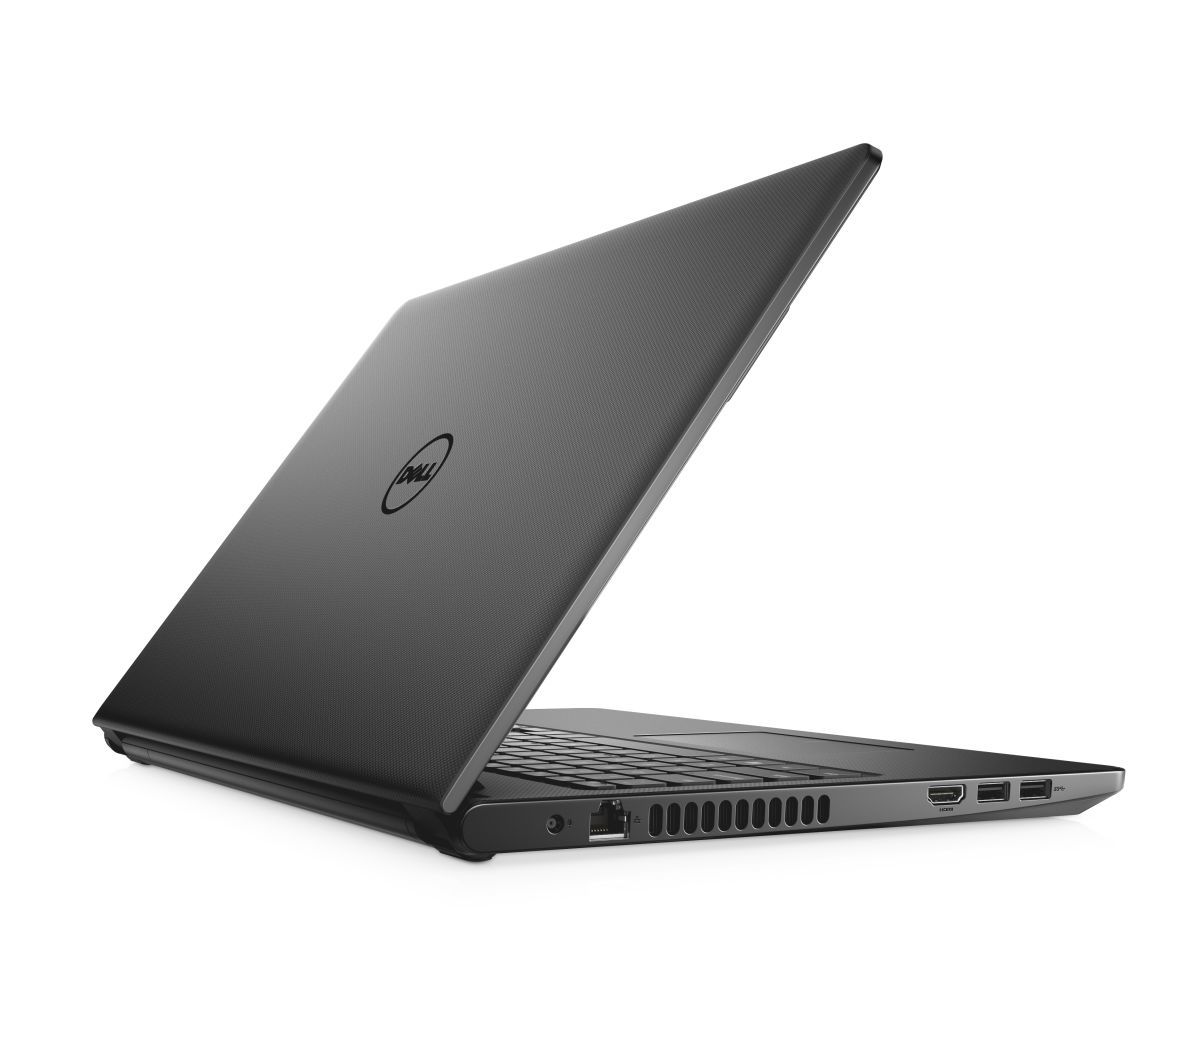 DELL Inspiron 3576 - 3576-INS-010-BLK laptop specifications